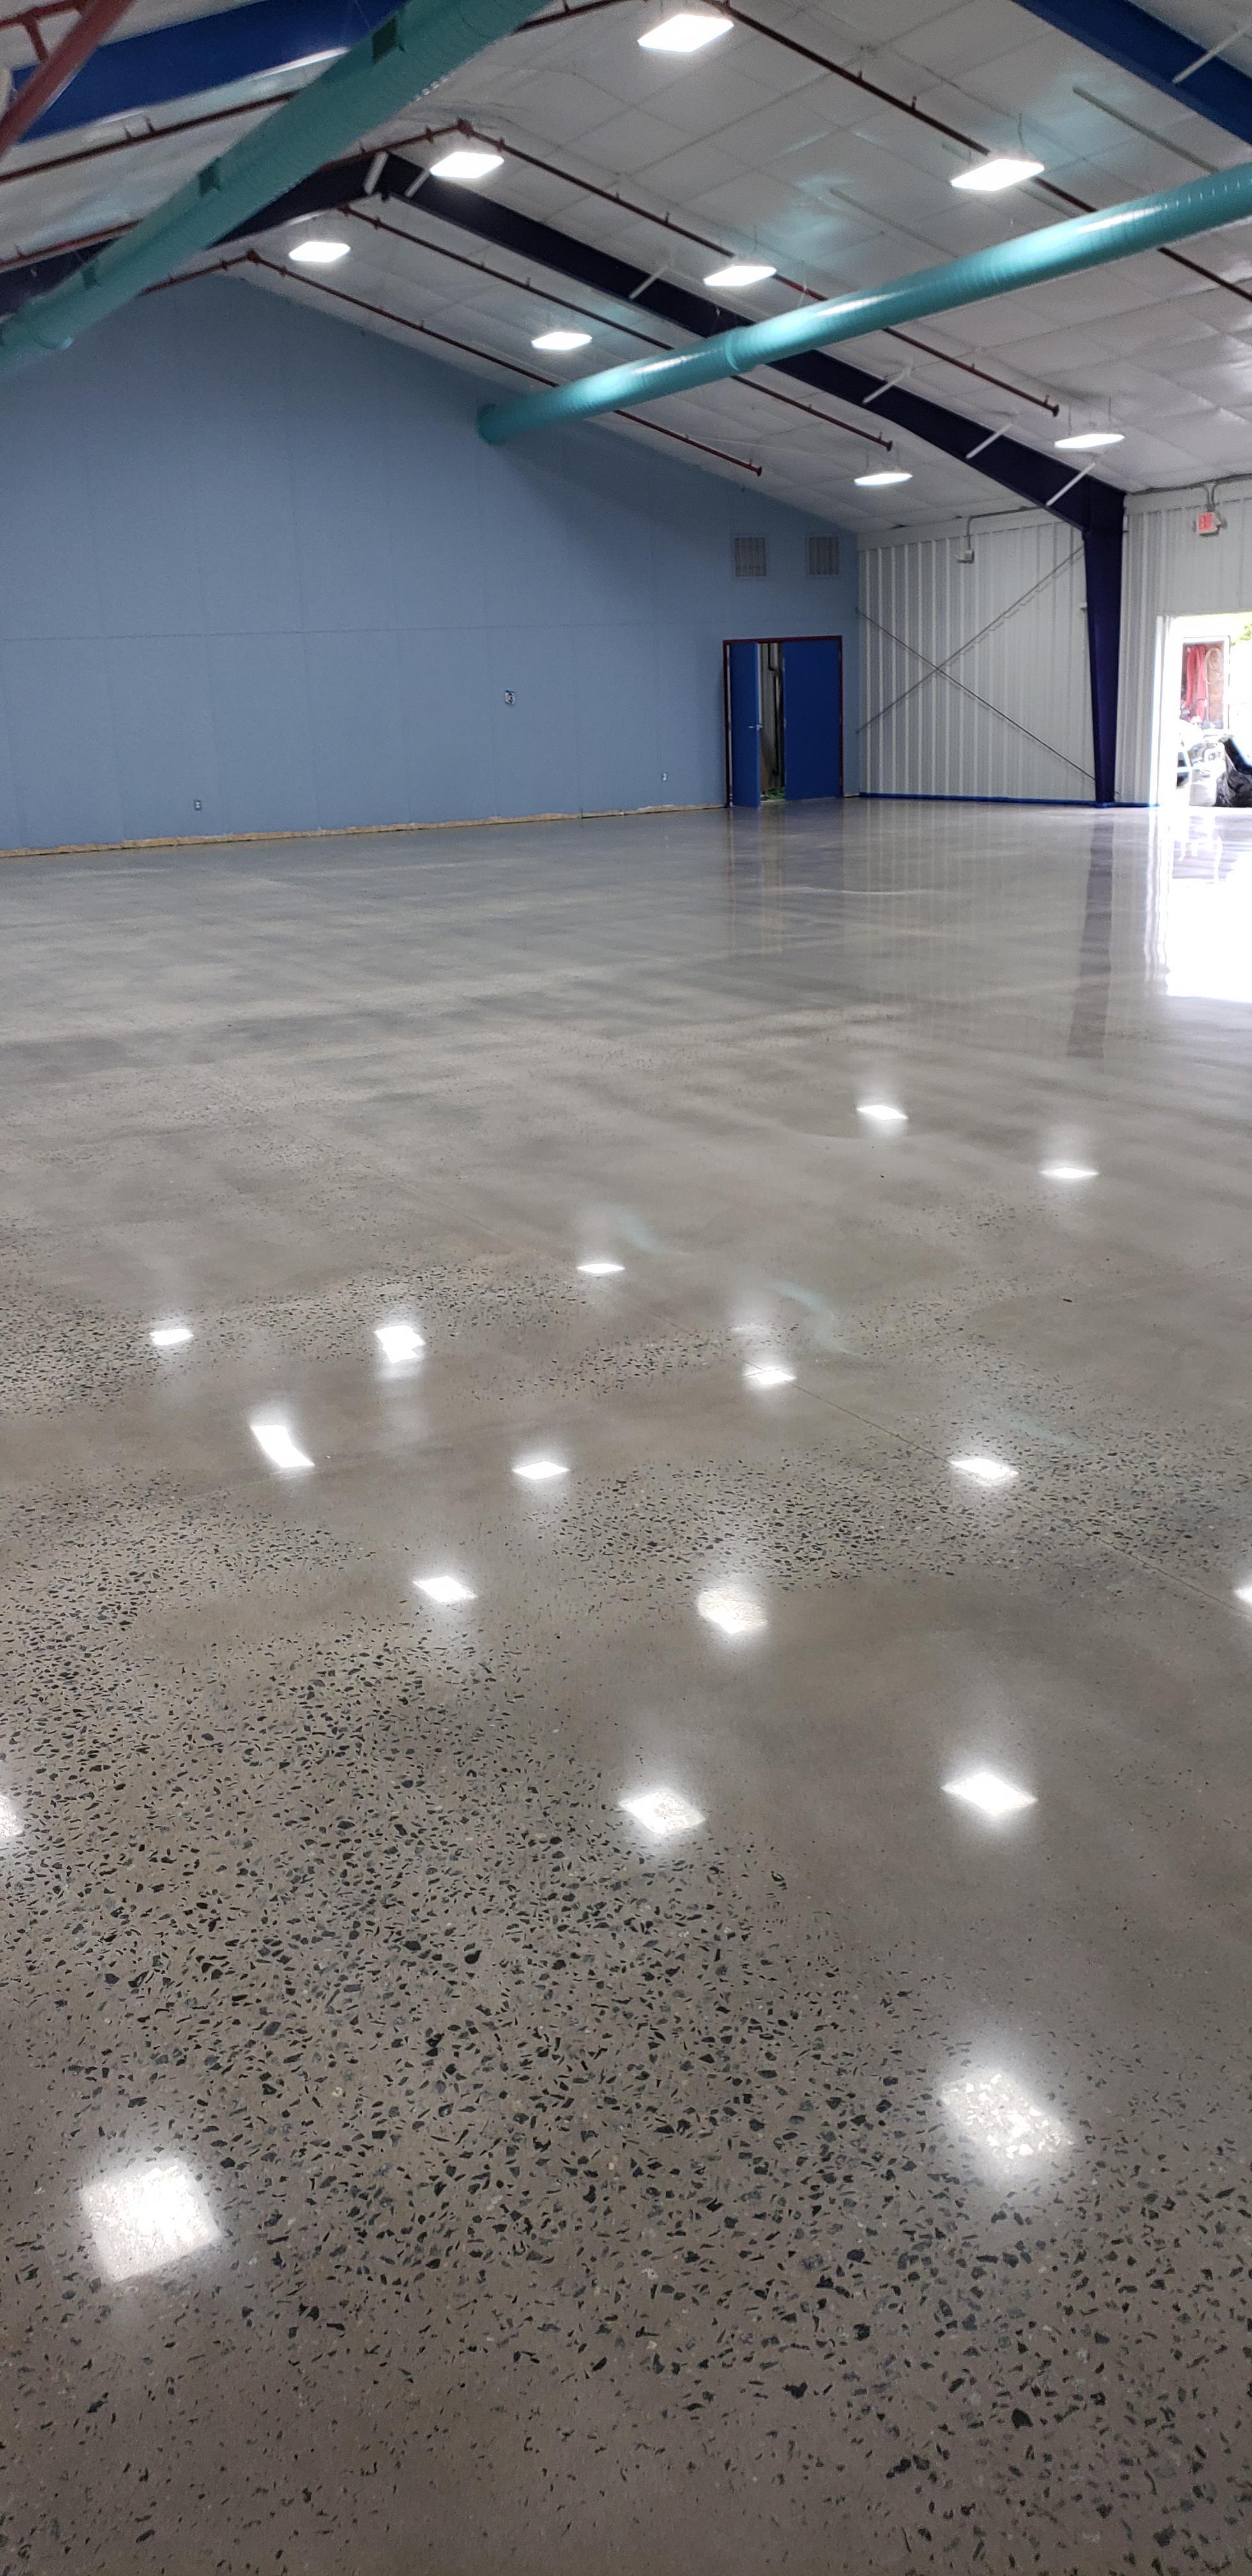 A gray polished concrete floor in an indoor archary range.